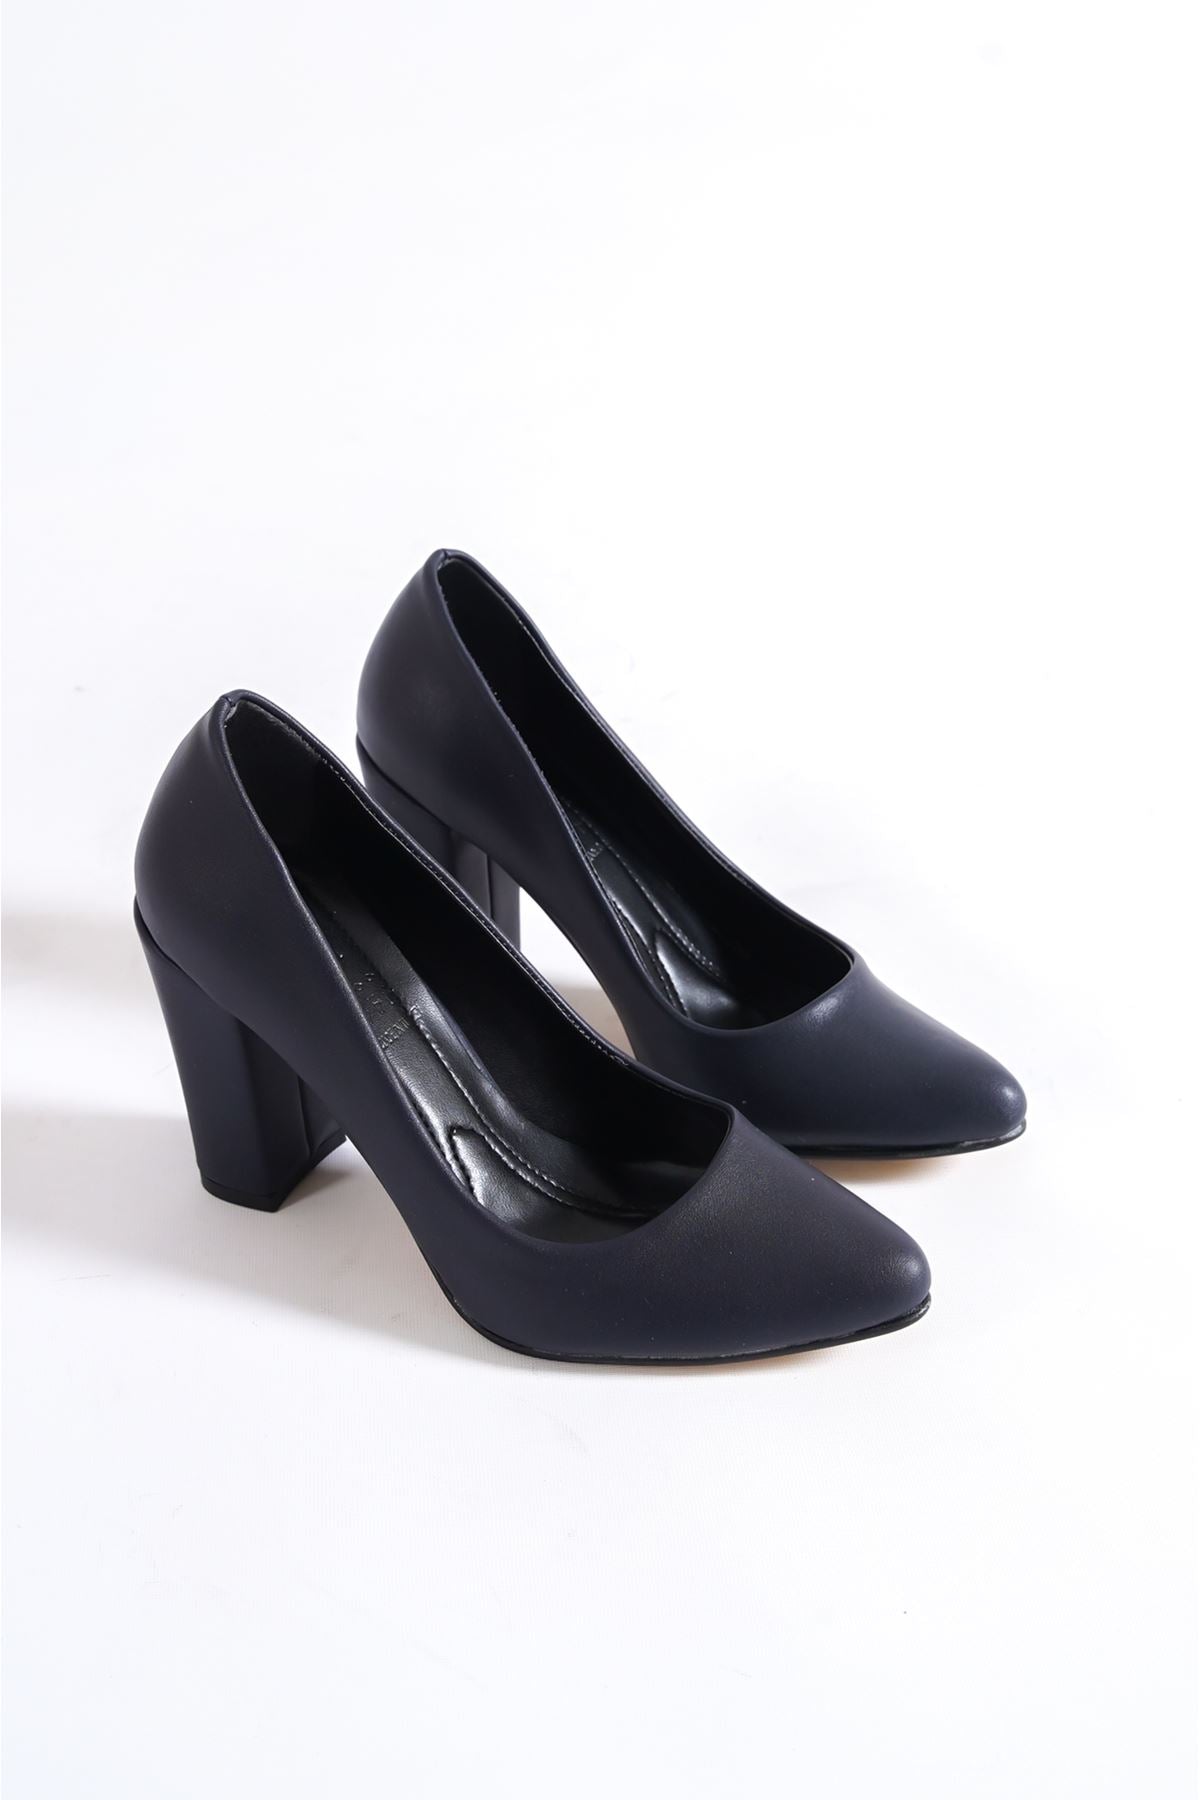 Women's Marry Navy Blue Skin Heeled Shoes - STREETMODE™